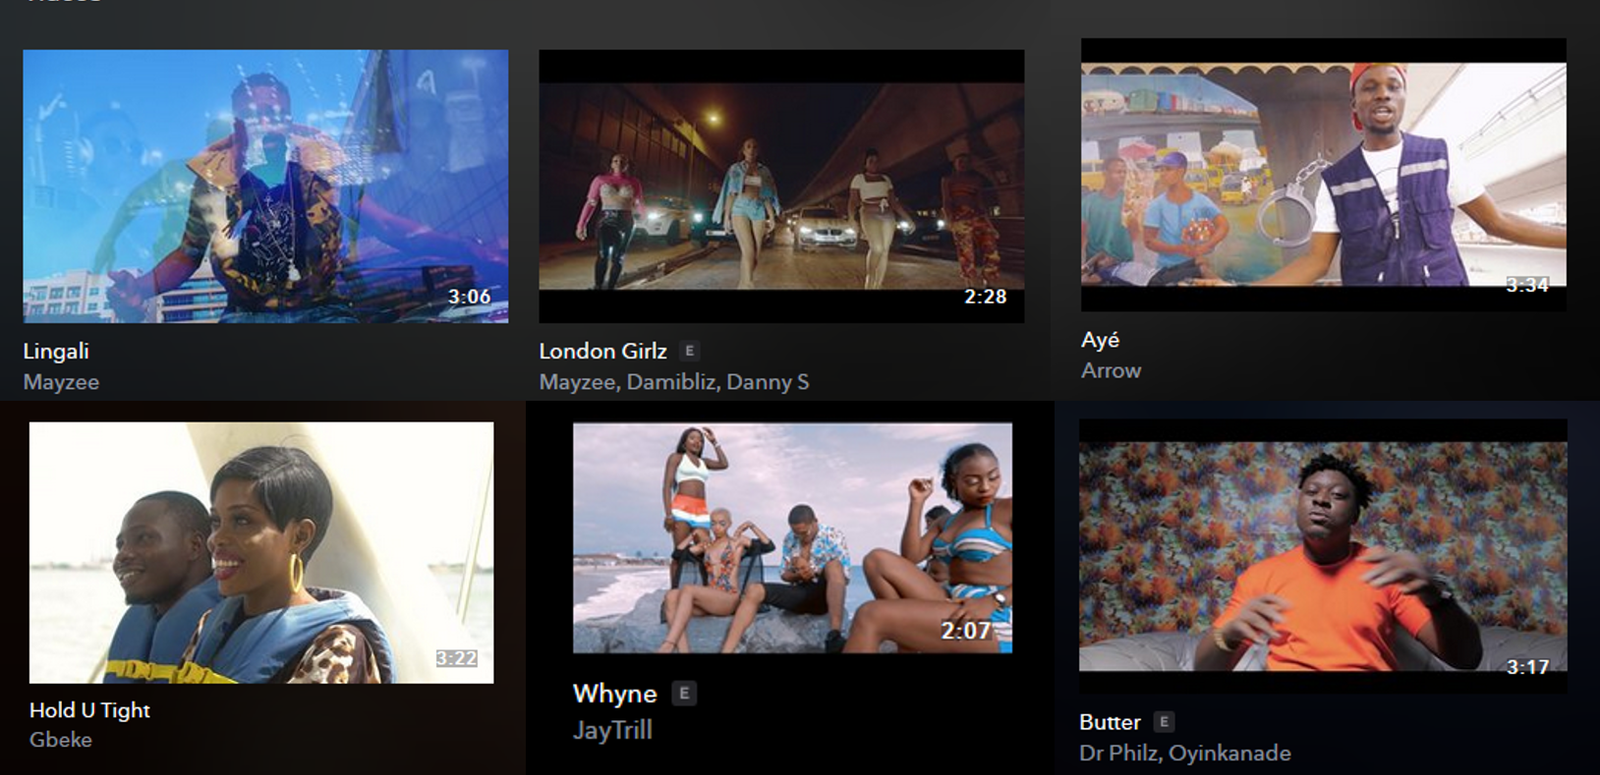 Ever wondered How To get your Music Video on Tidal?  1710Media offers the possibility to have your music video published on Tidal.